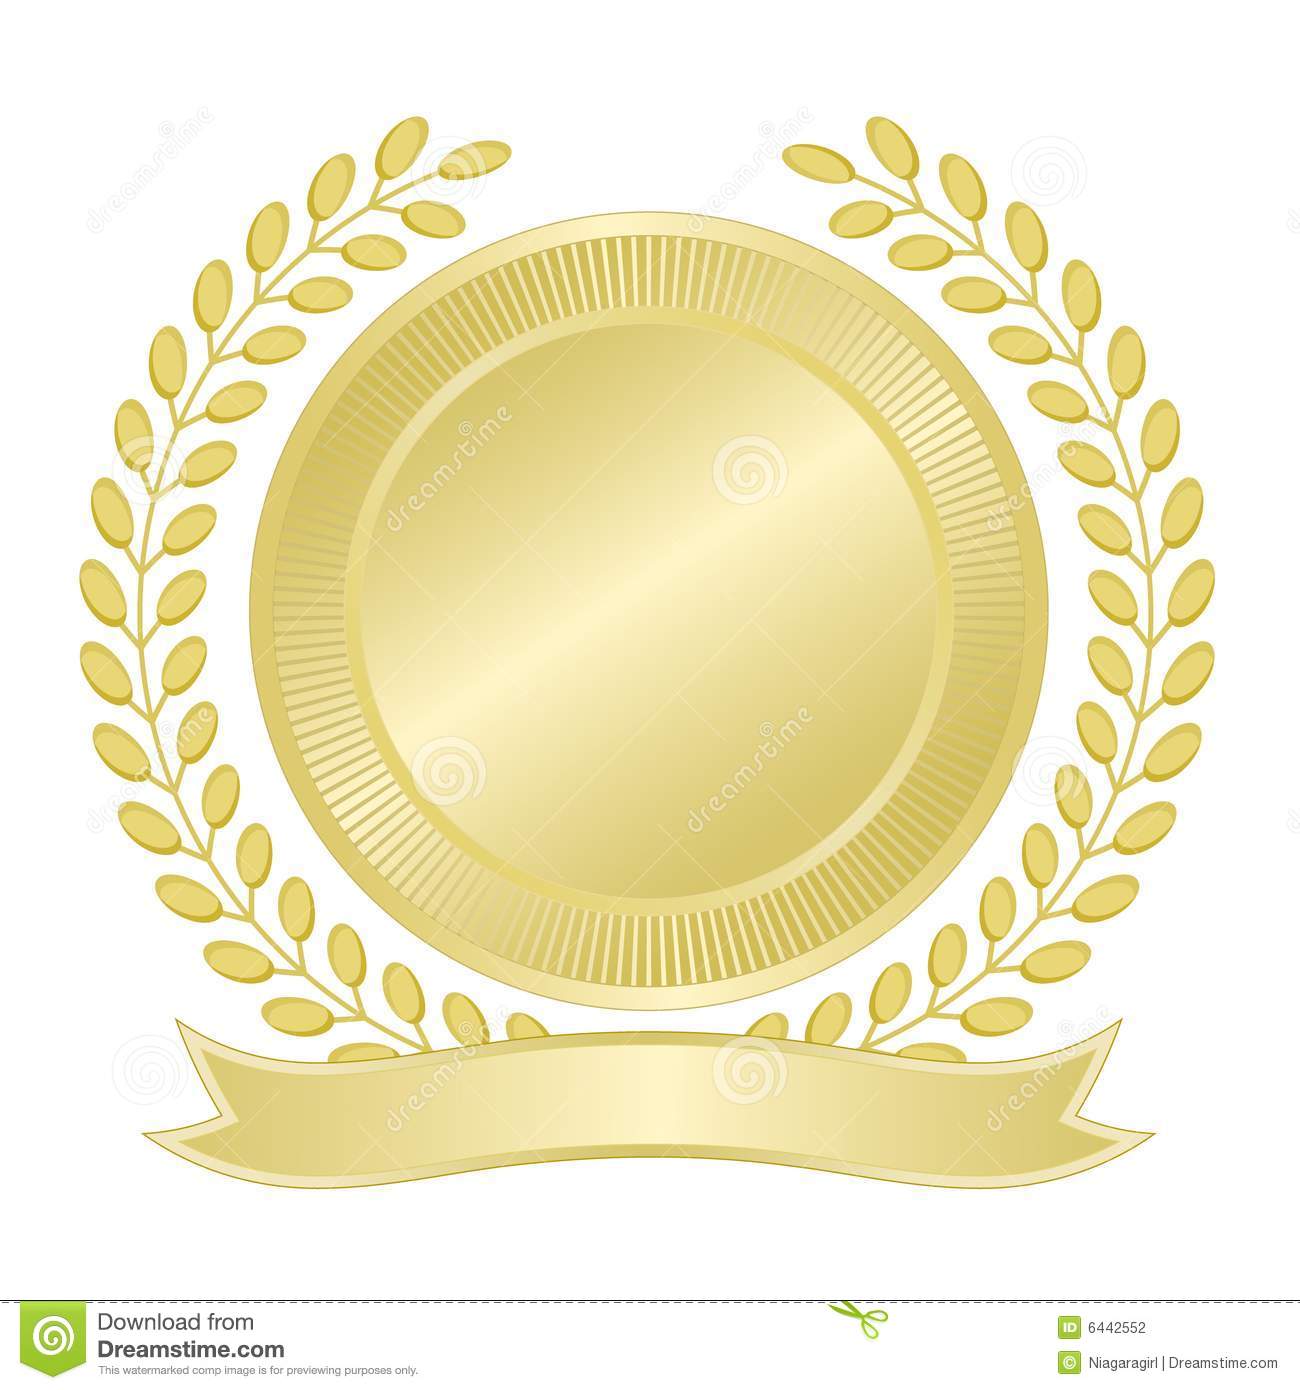 Blank Gold Seal With Wreath Of Leaves And Ribbon Banner For Award